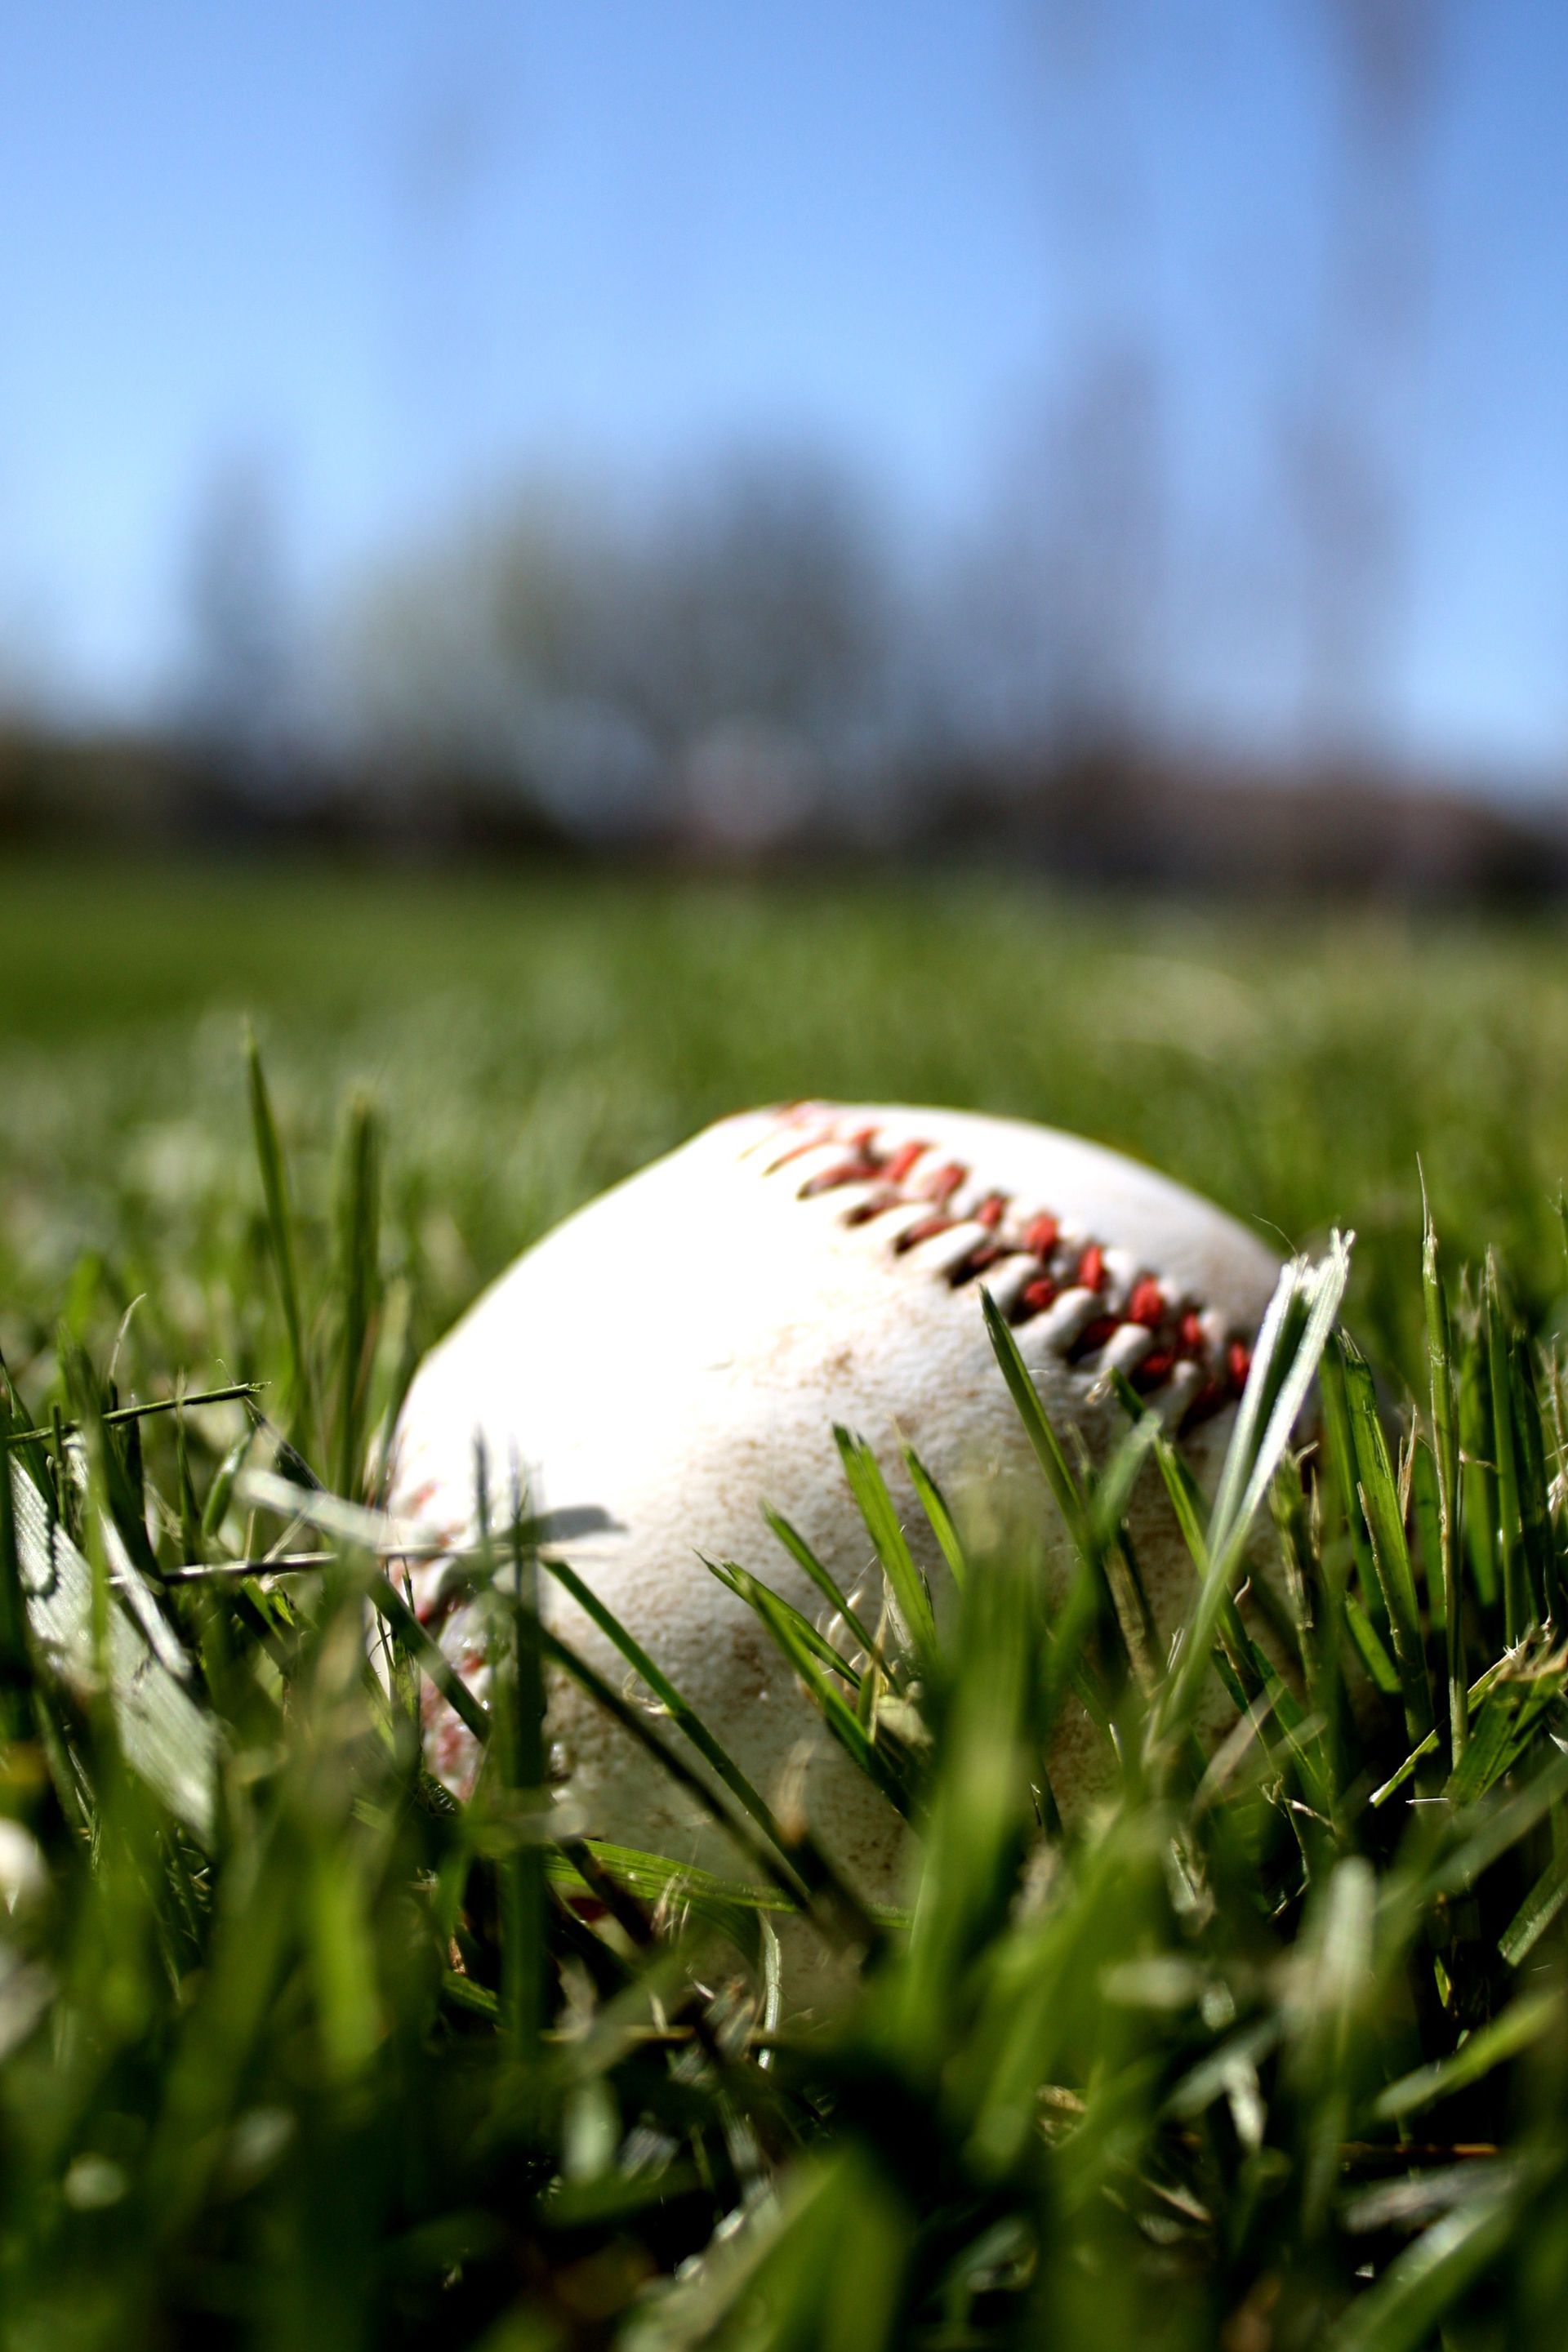 A baseball in the grass.